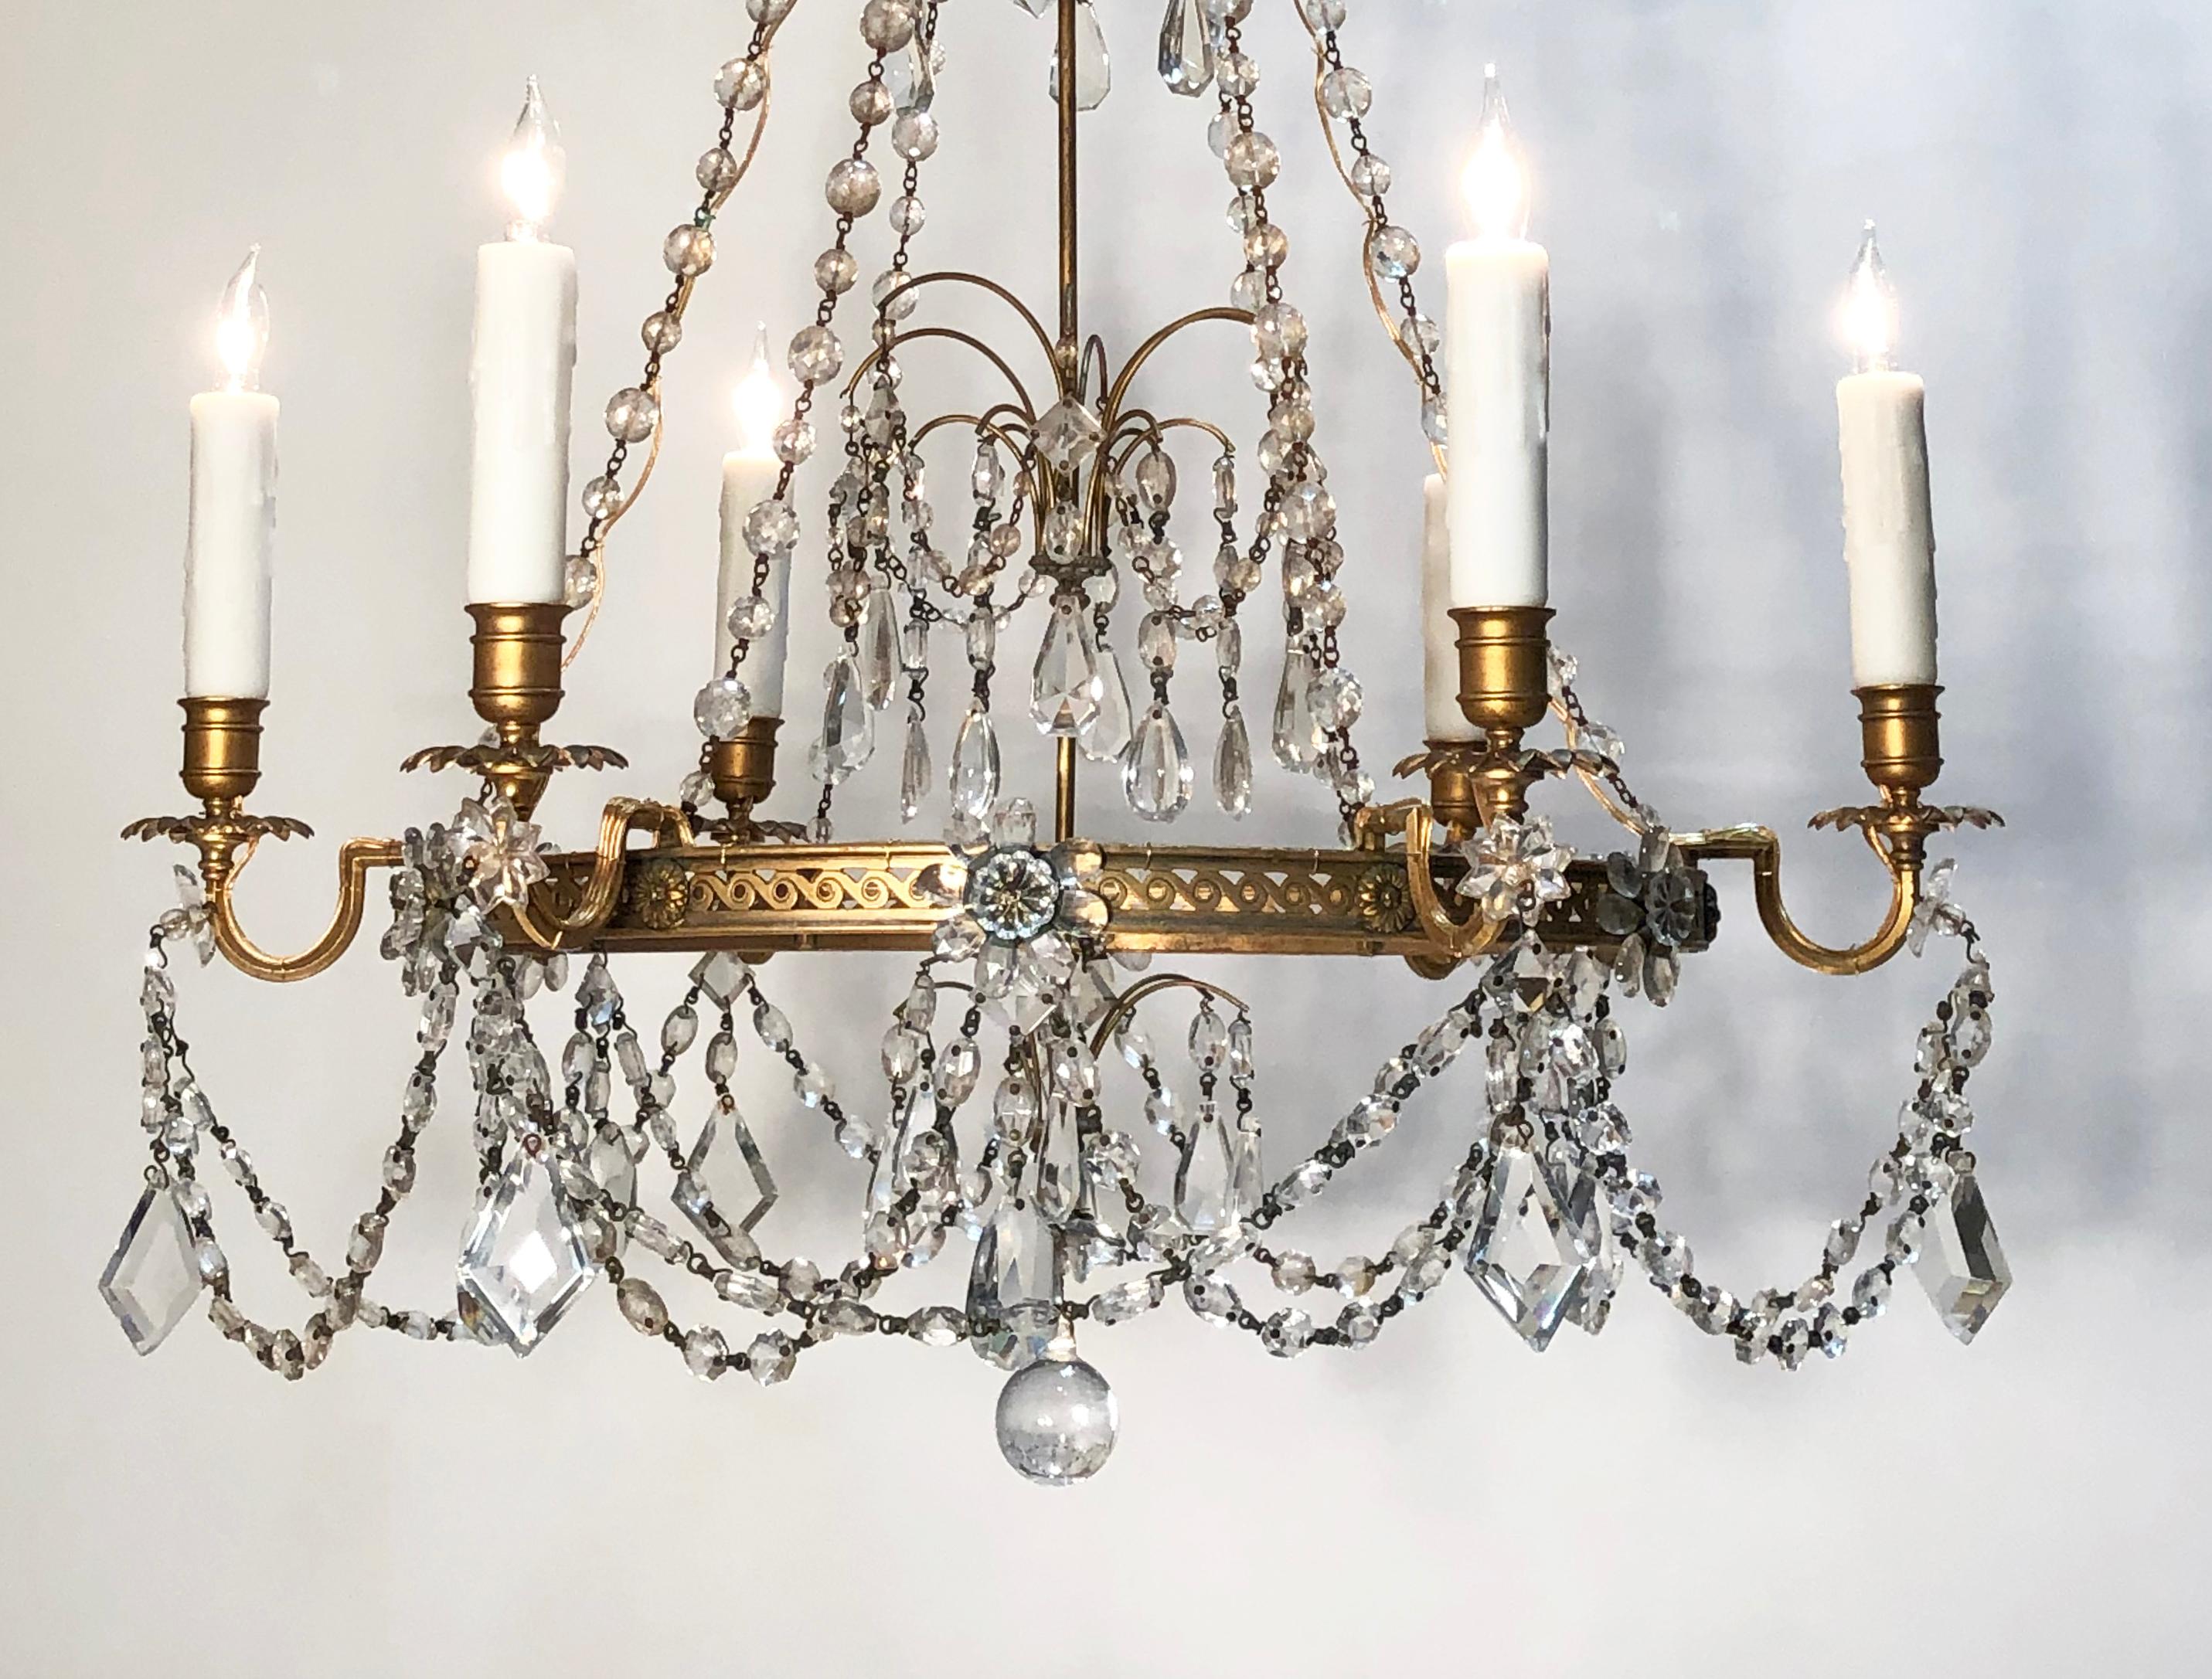 This beautiful early 20th century brass and crystal chandelier is attributed to Caldwell of New York. The chandelier is Regency in style featuring a wonderful pierced brass central ring. The chandelier has 6 electrified candle arms.